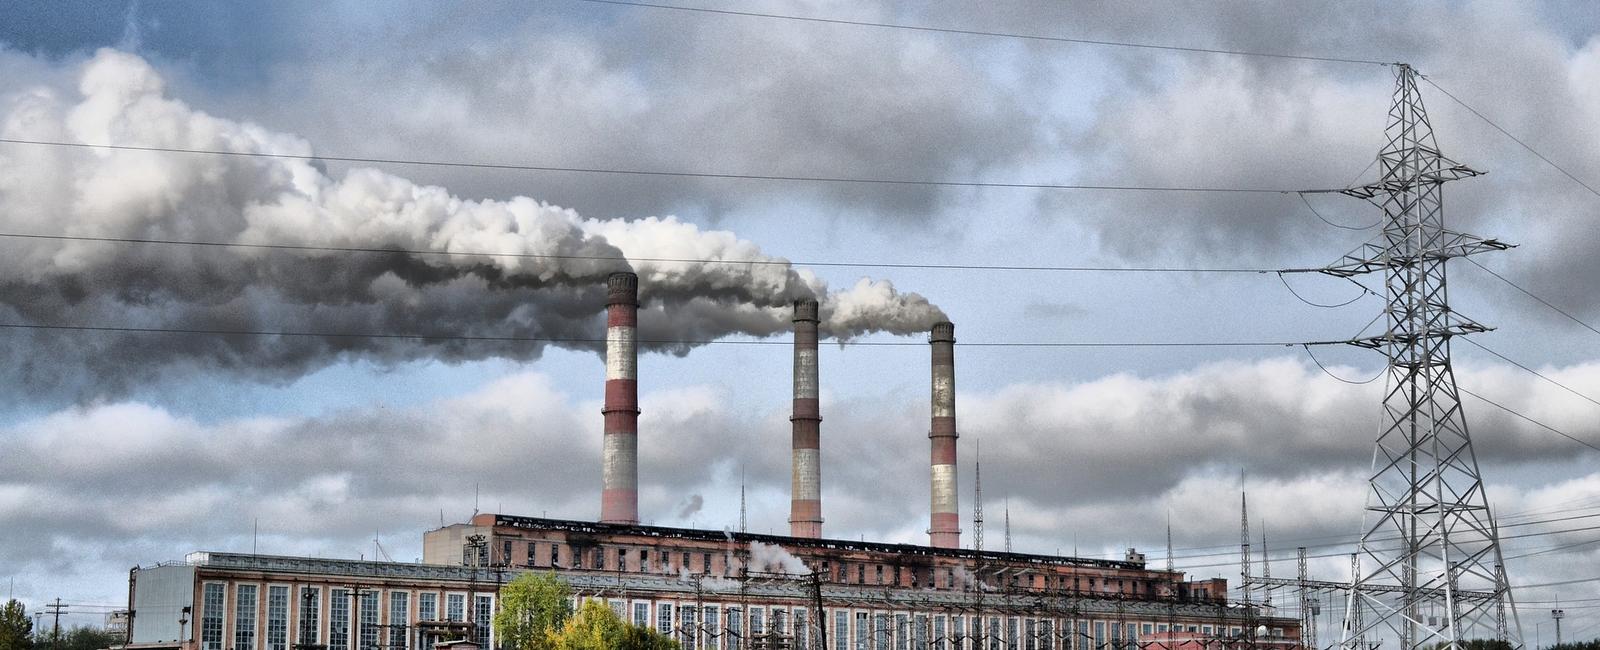 Number Of Industrial Facilities Emit The Majority Of Toxic Pollution